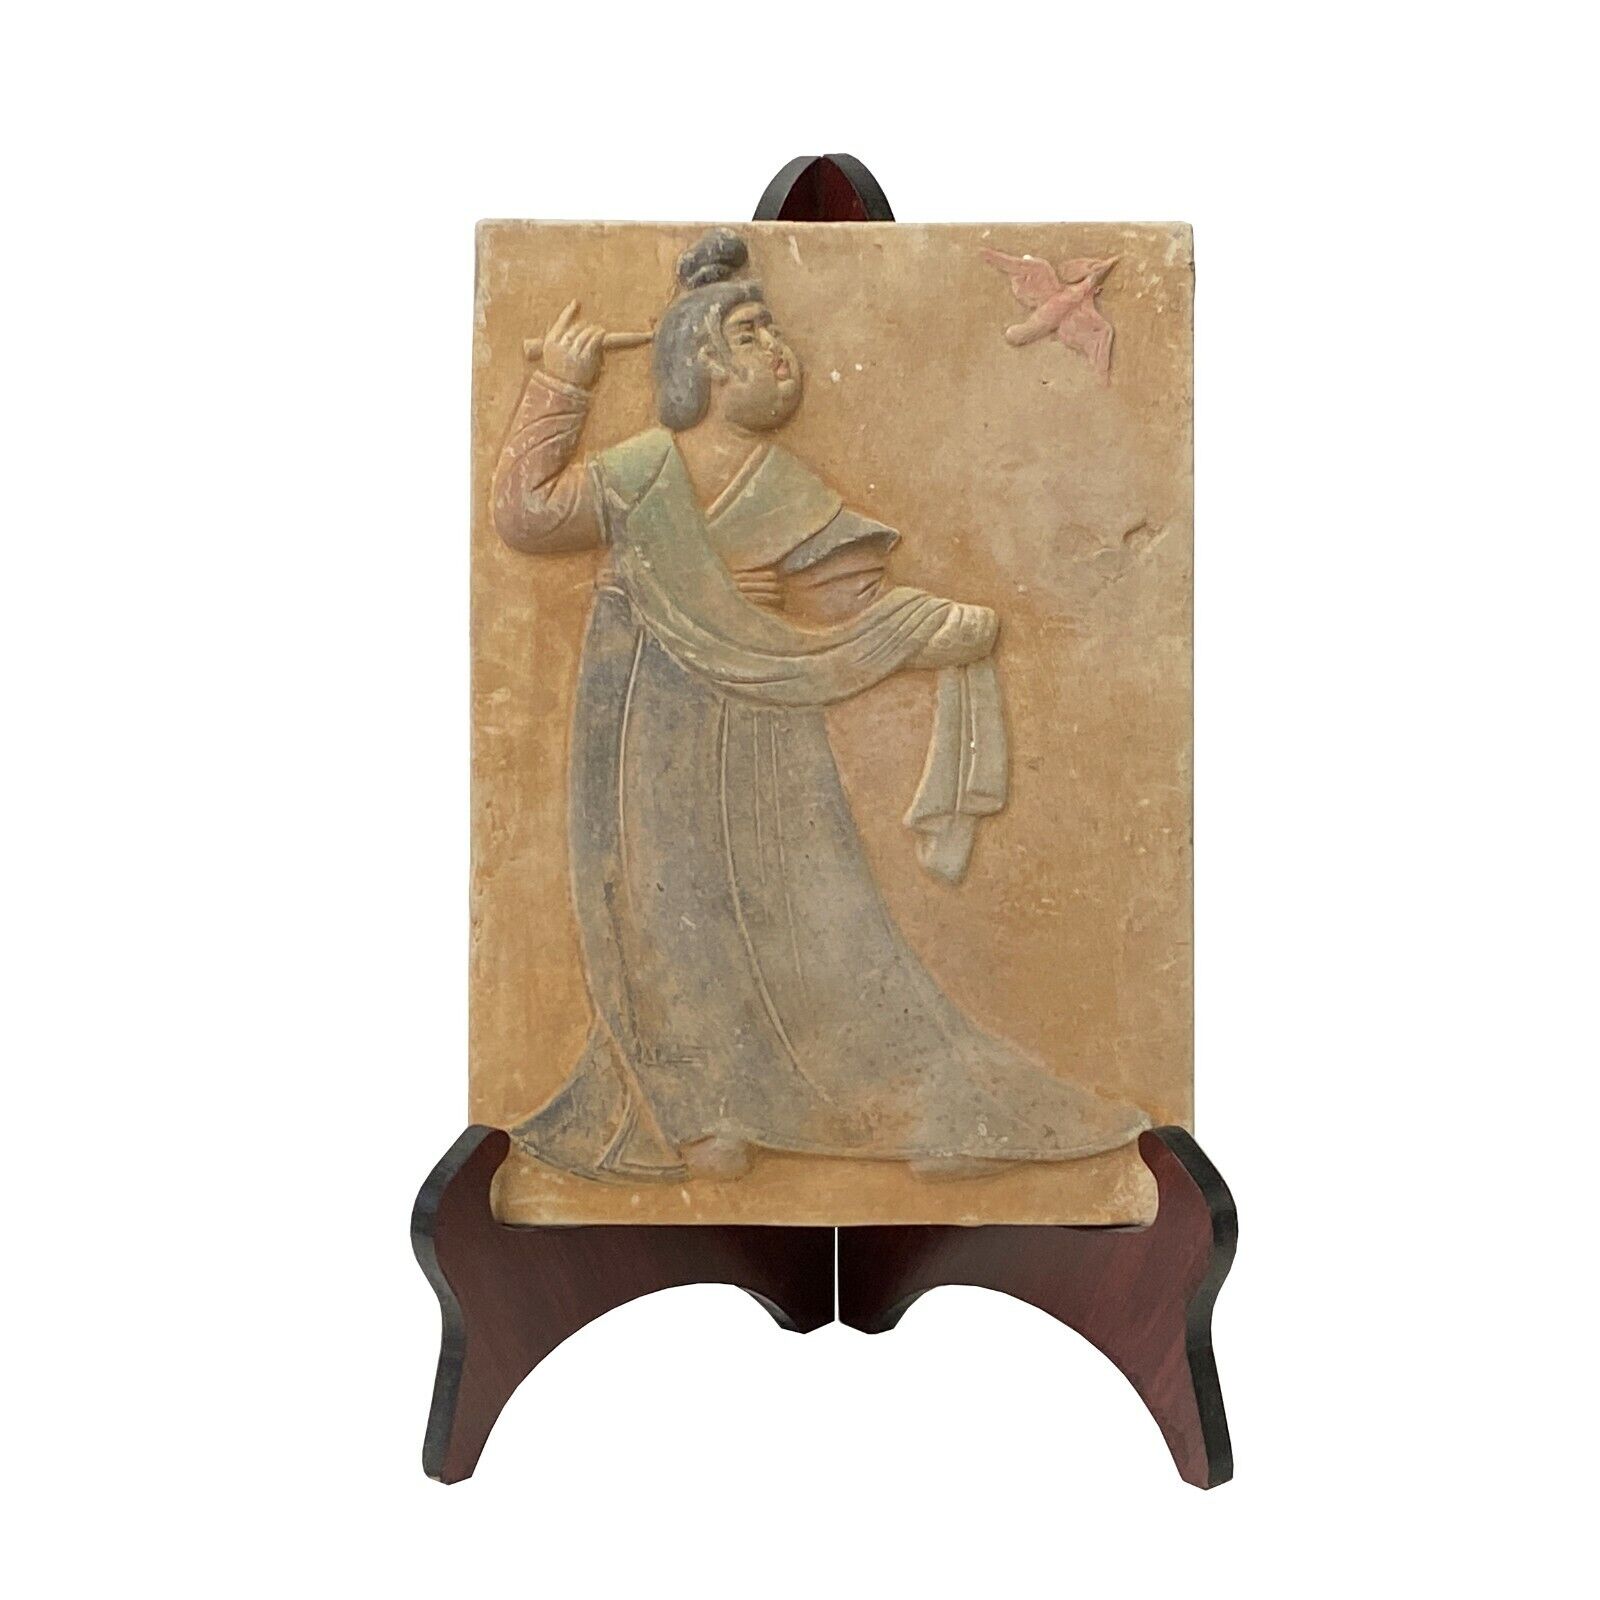 Chinese Oriental Handmade Clay Tong Lady Theme Plaque Display ws1481